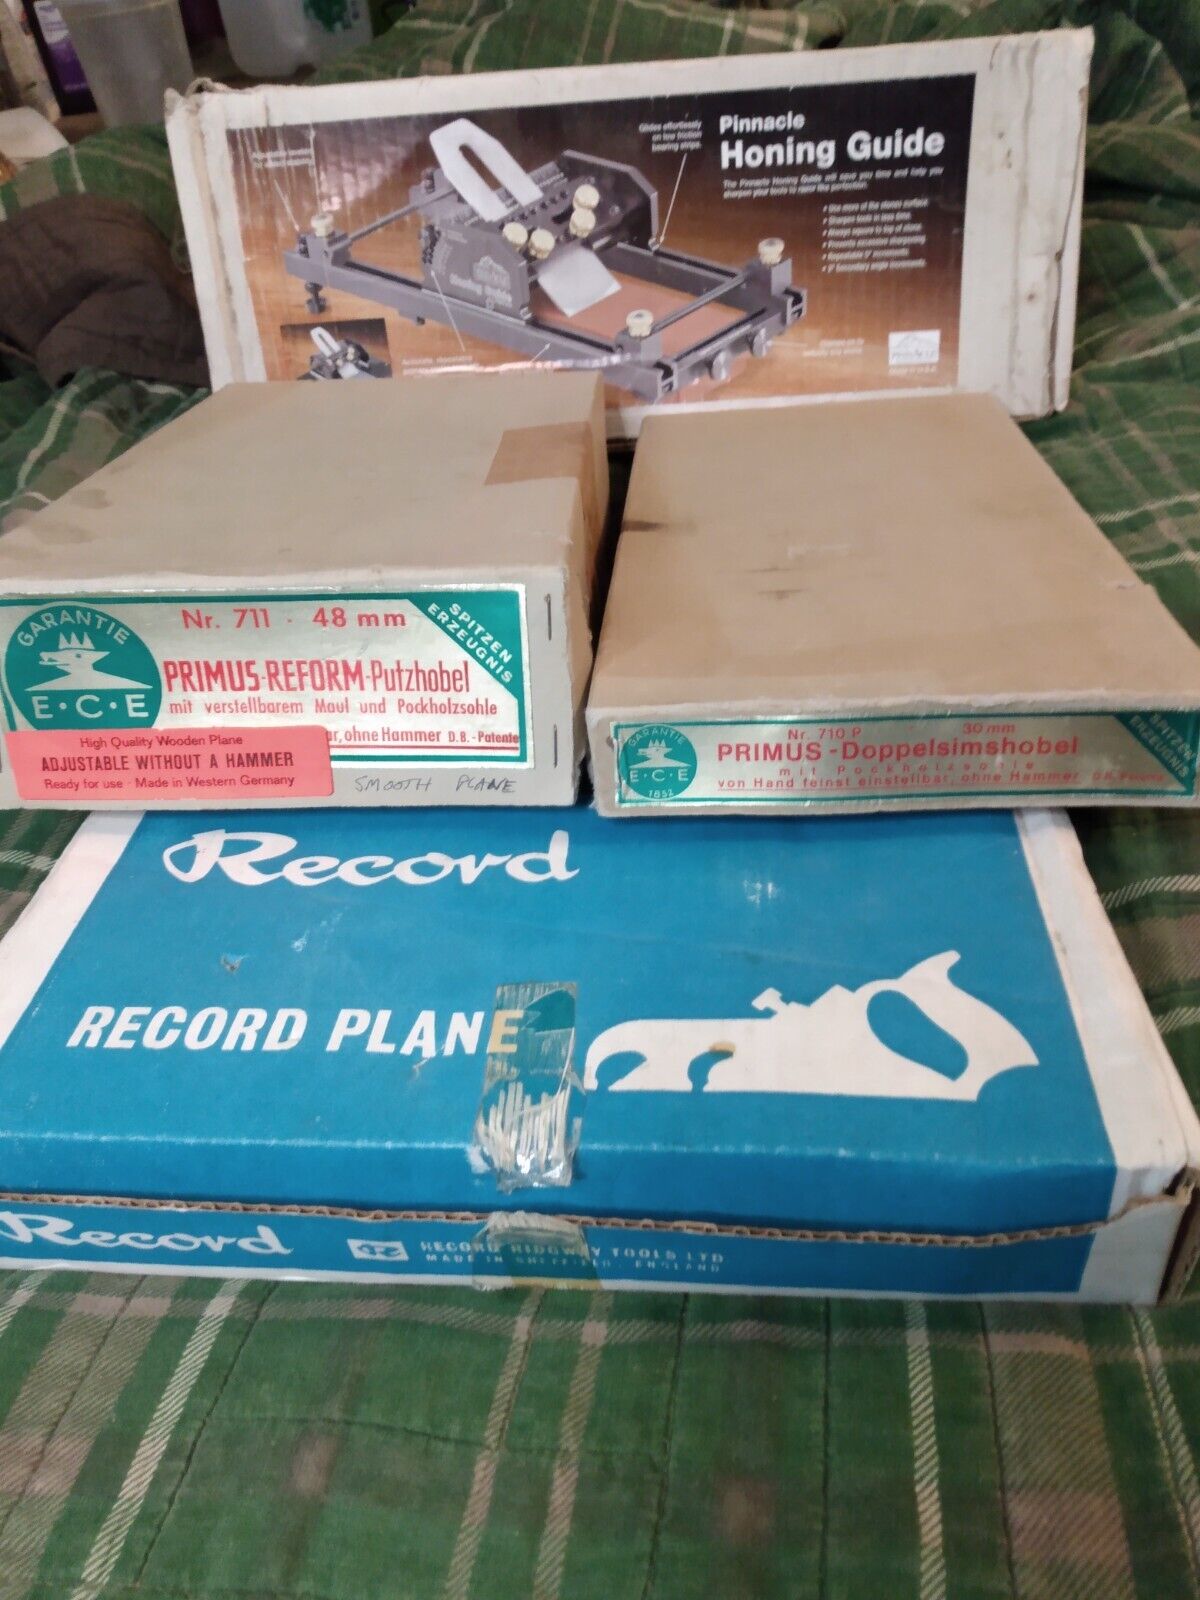 vintage woodworking plane tool lot. ECE, Record, pinnacle.